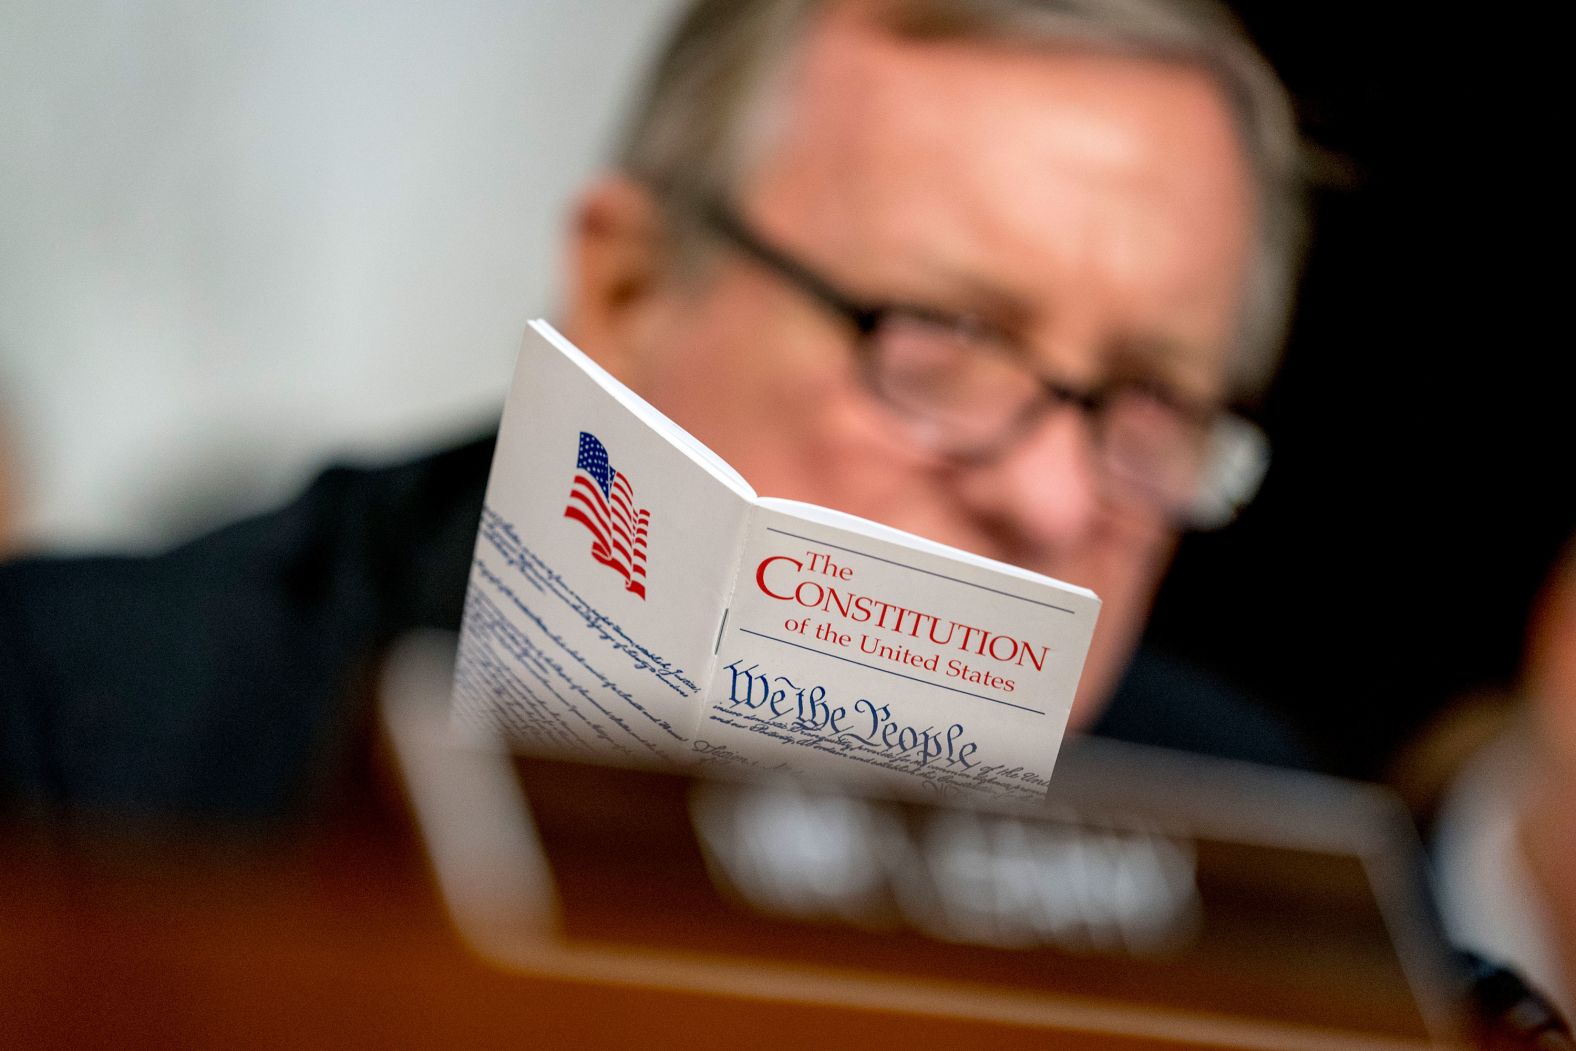 Sen. Dick Durbin, a Democrat from Illinois, holds up a copy of the Constitution as he speaks during Tuesday's hearing.